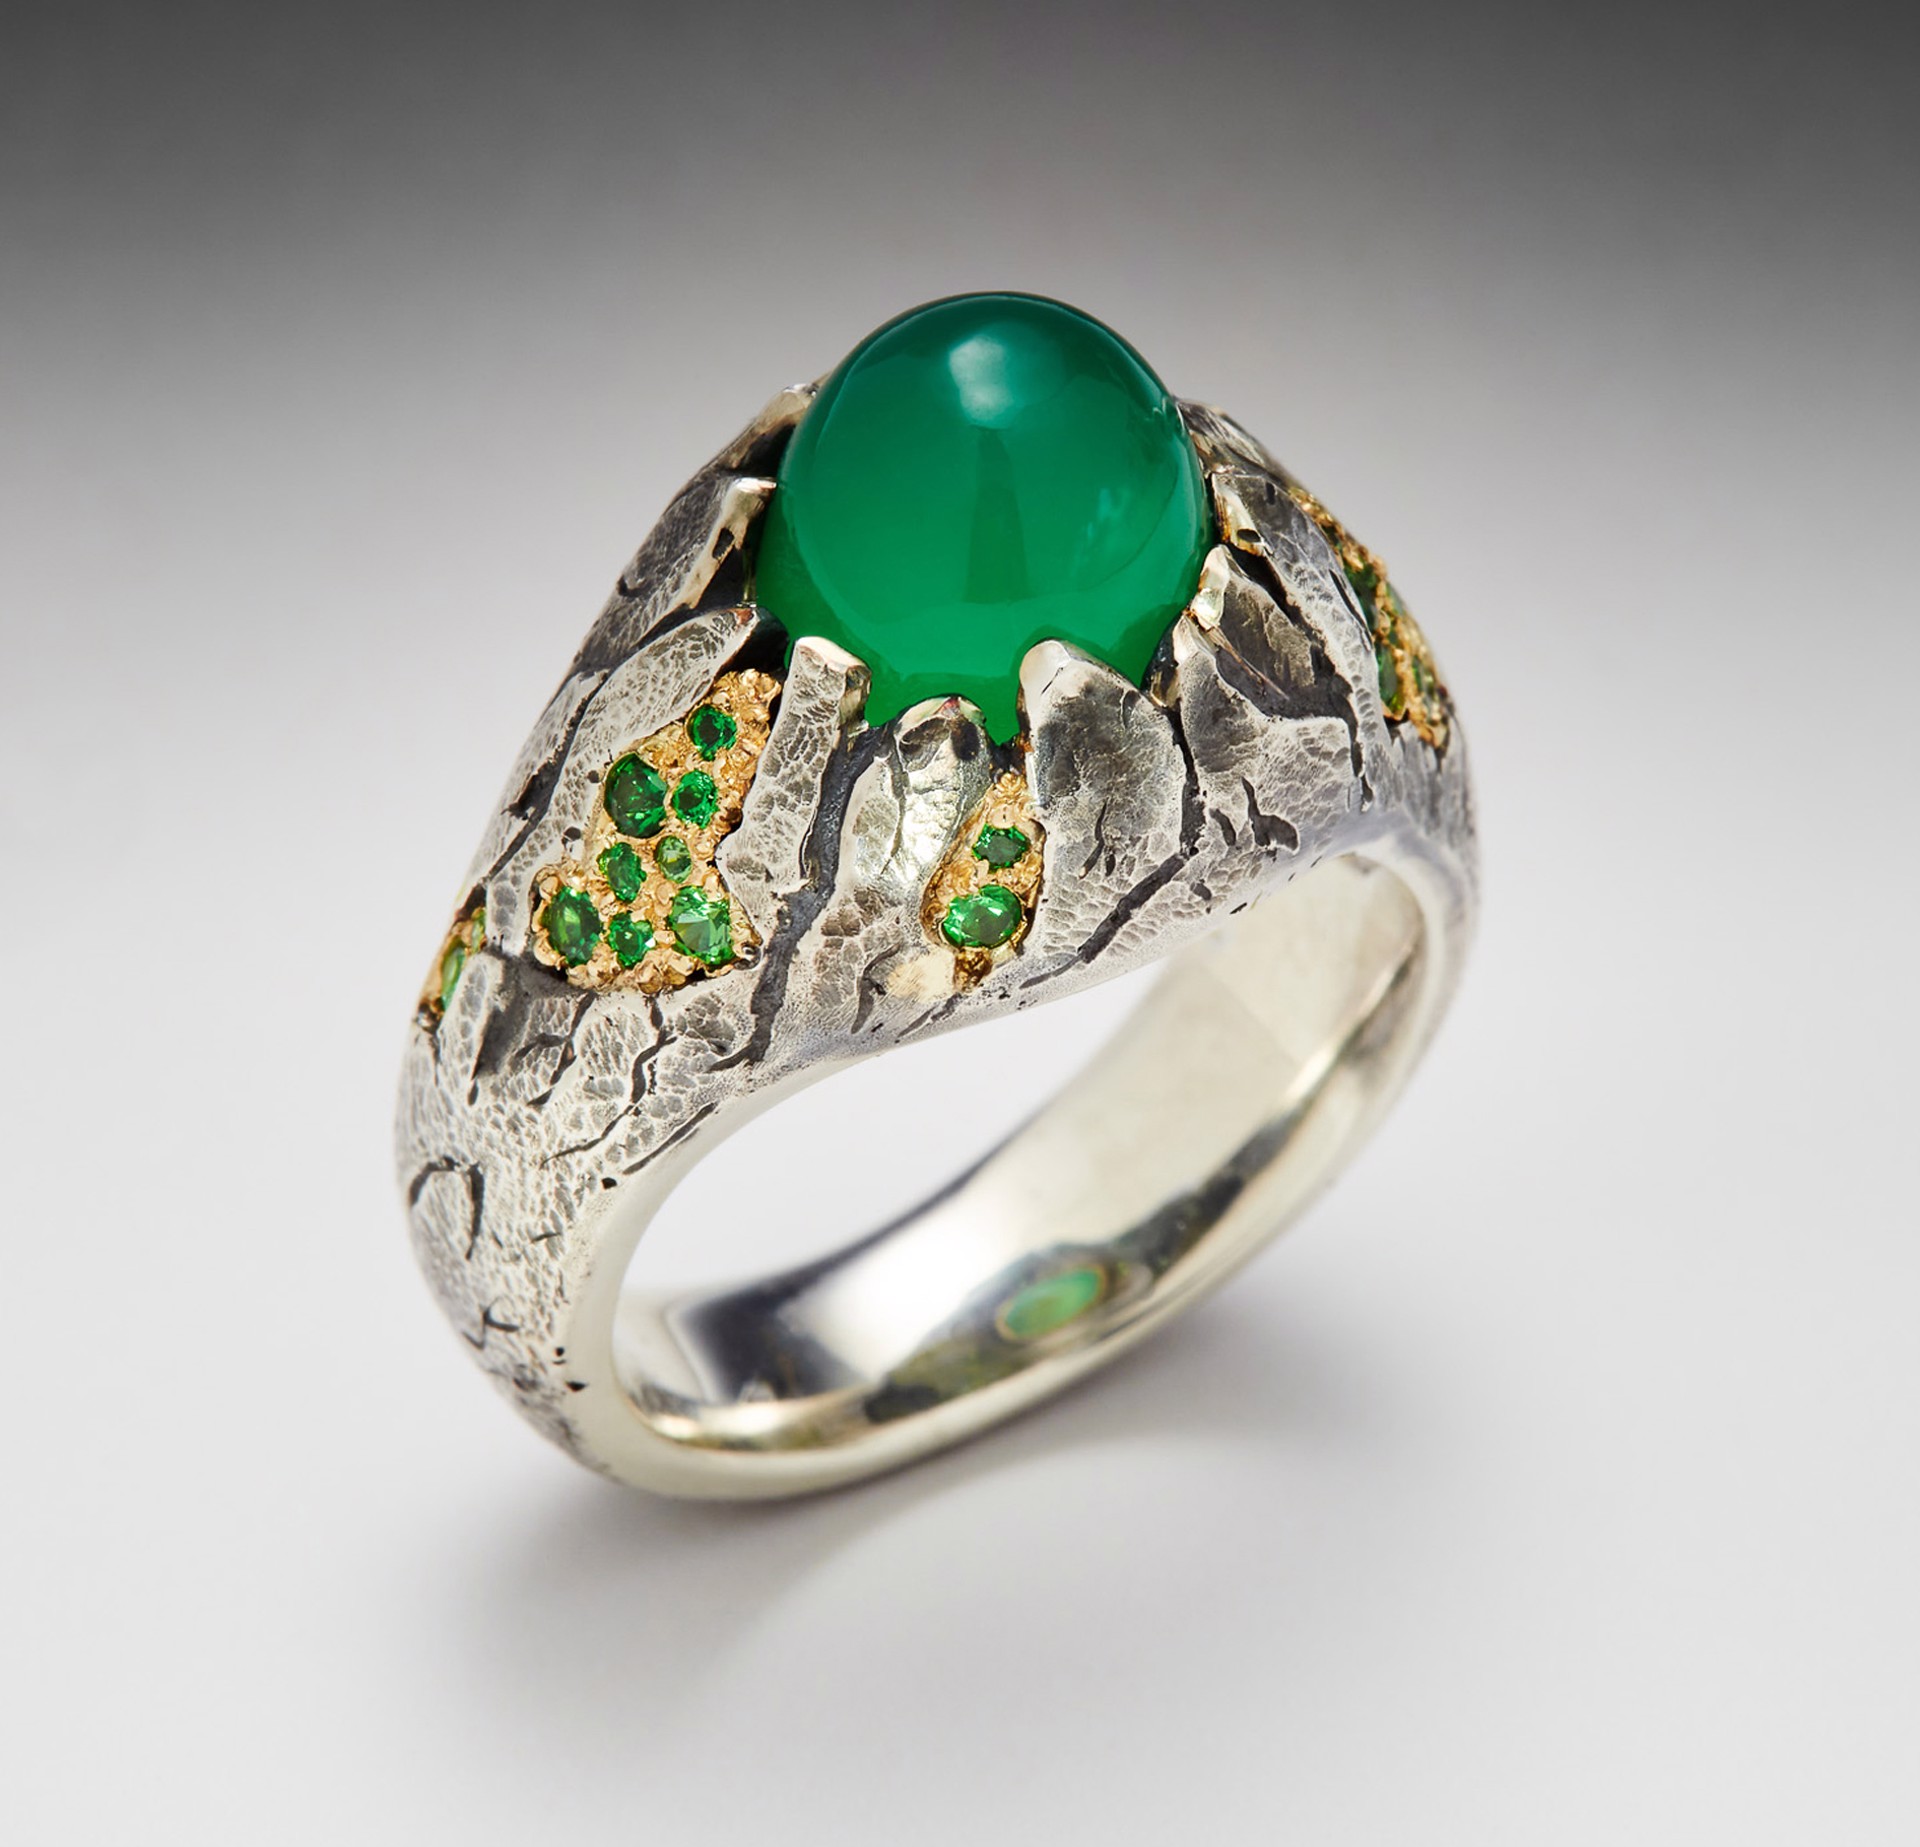 Emerge Ring with Chrysoprase by Thomas Tietze